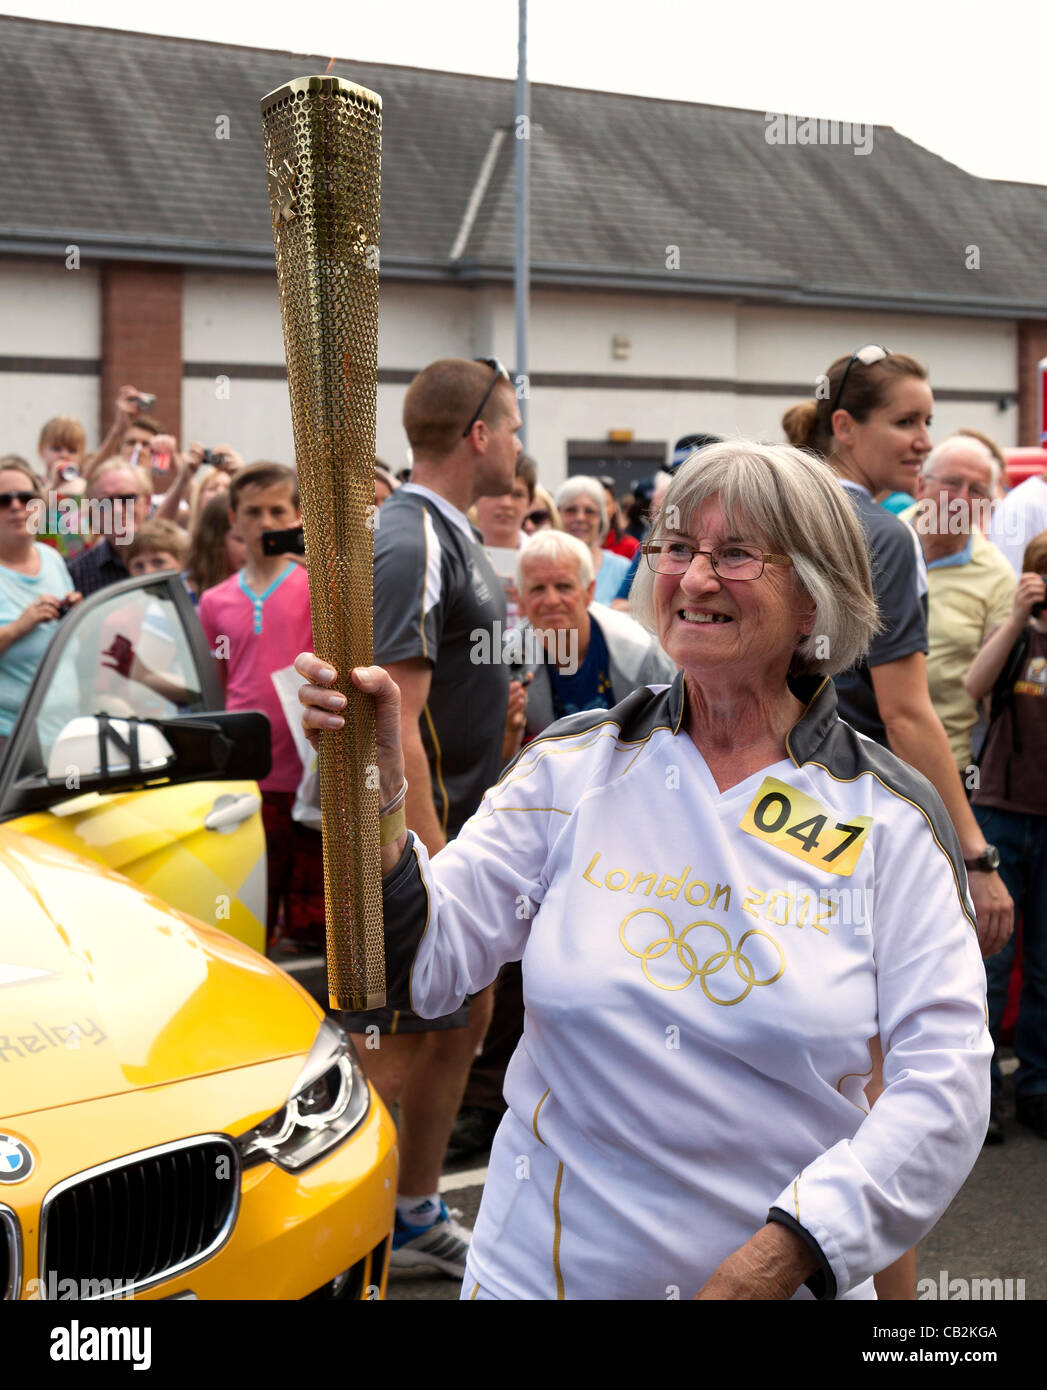 Dorothy Turner of Caldicot aged 70 carrying the flame during the torch relay for the London 2012 Olympics through Abergavenny, Wales, UK on Friday 25 May 2012 Stock Photo